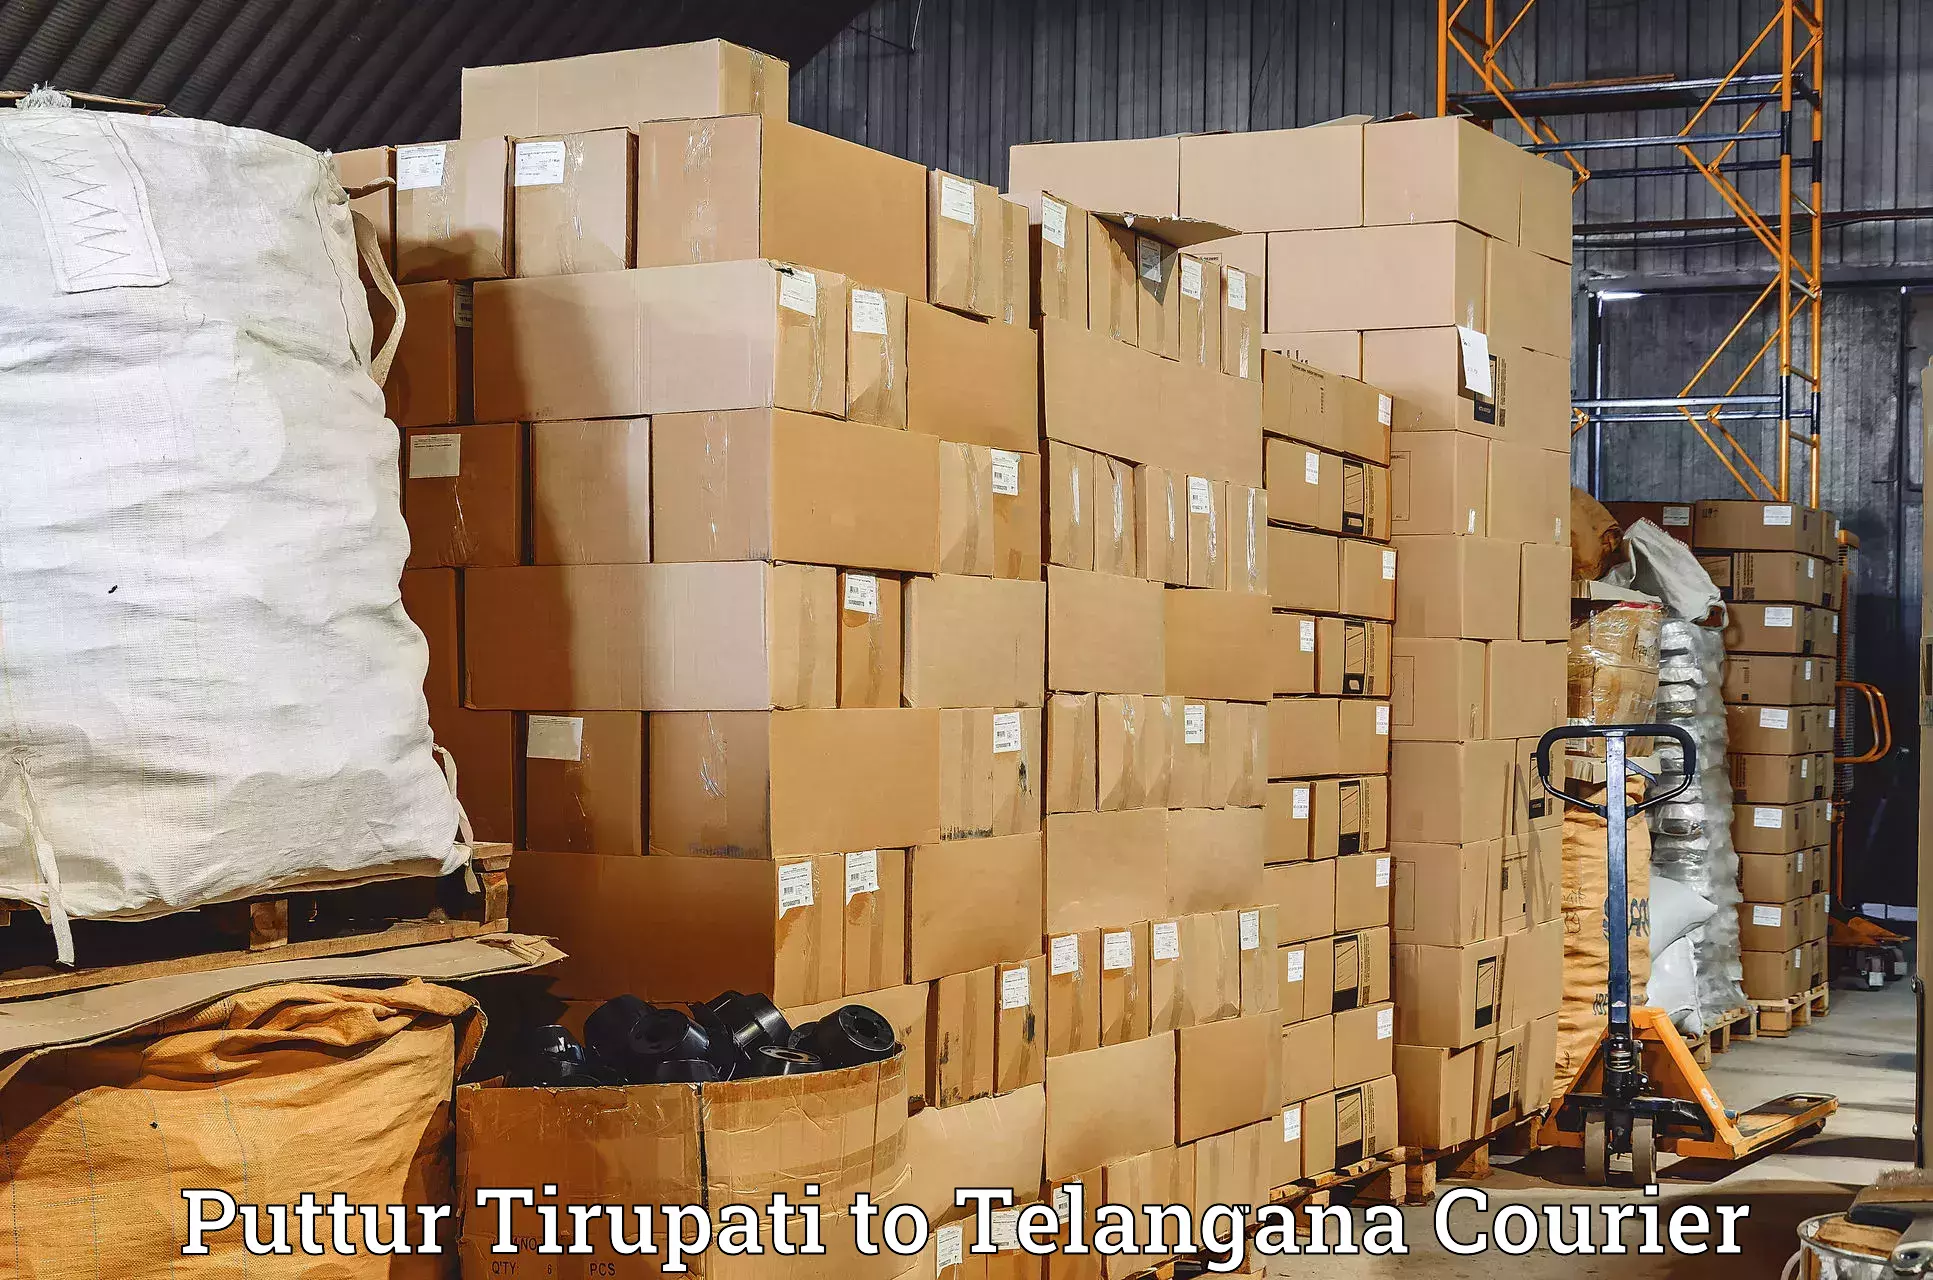 Subscription-based courier Puttur Tirupati to Luxettipet